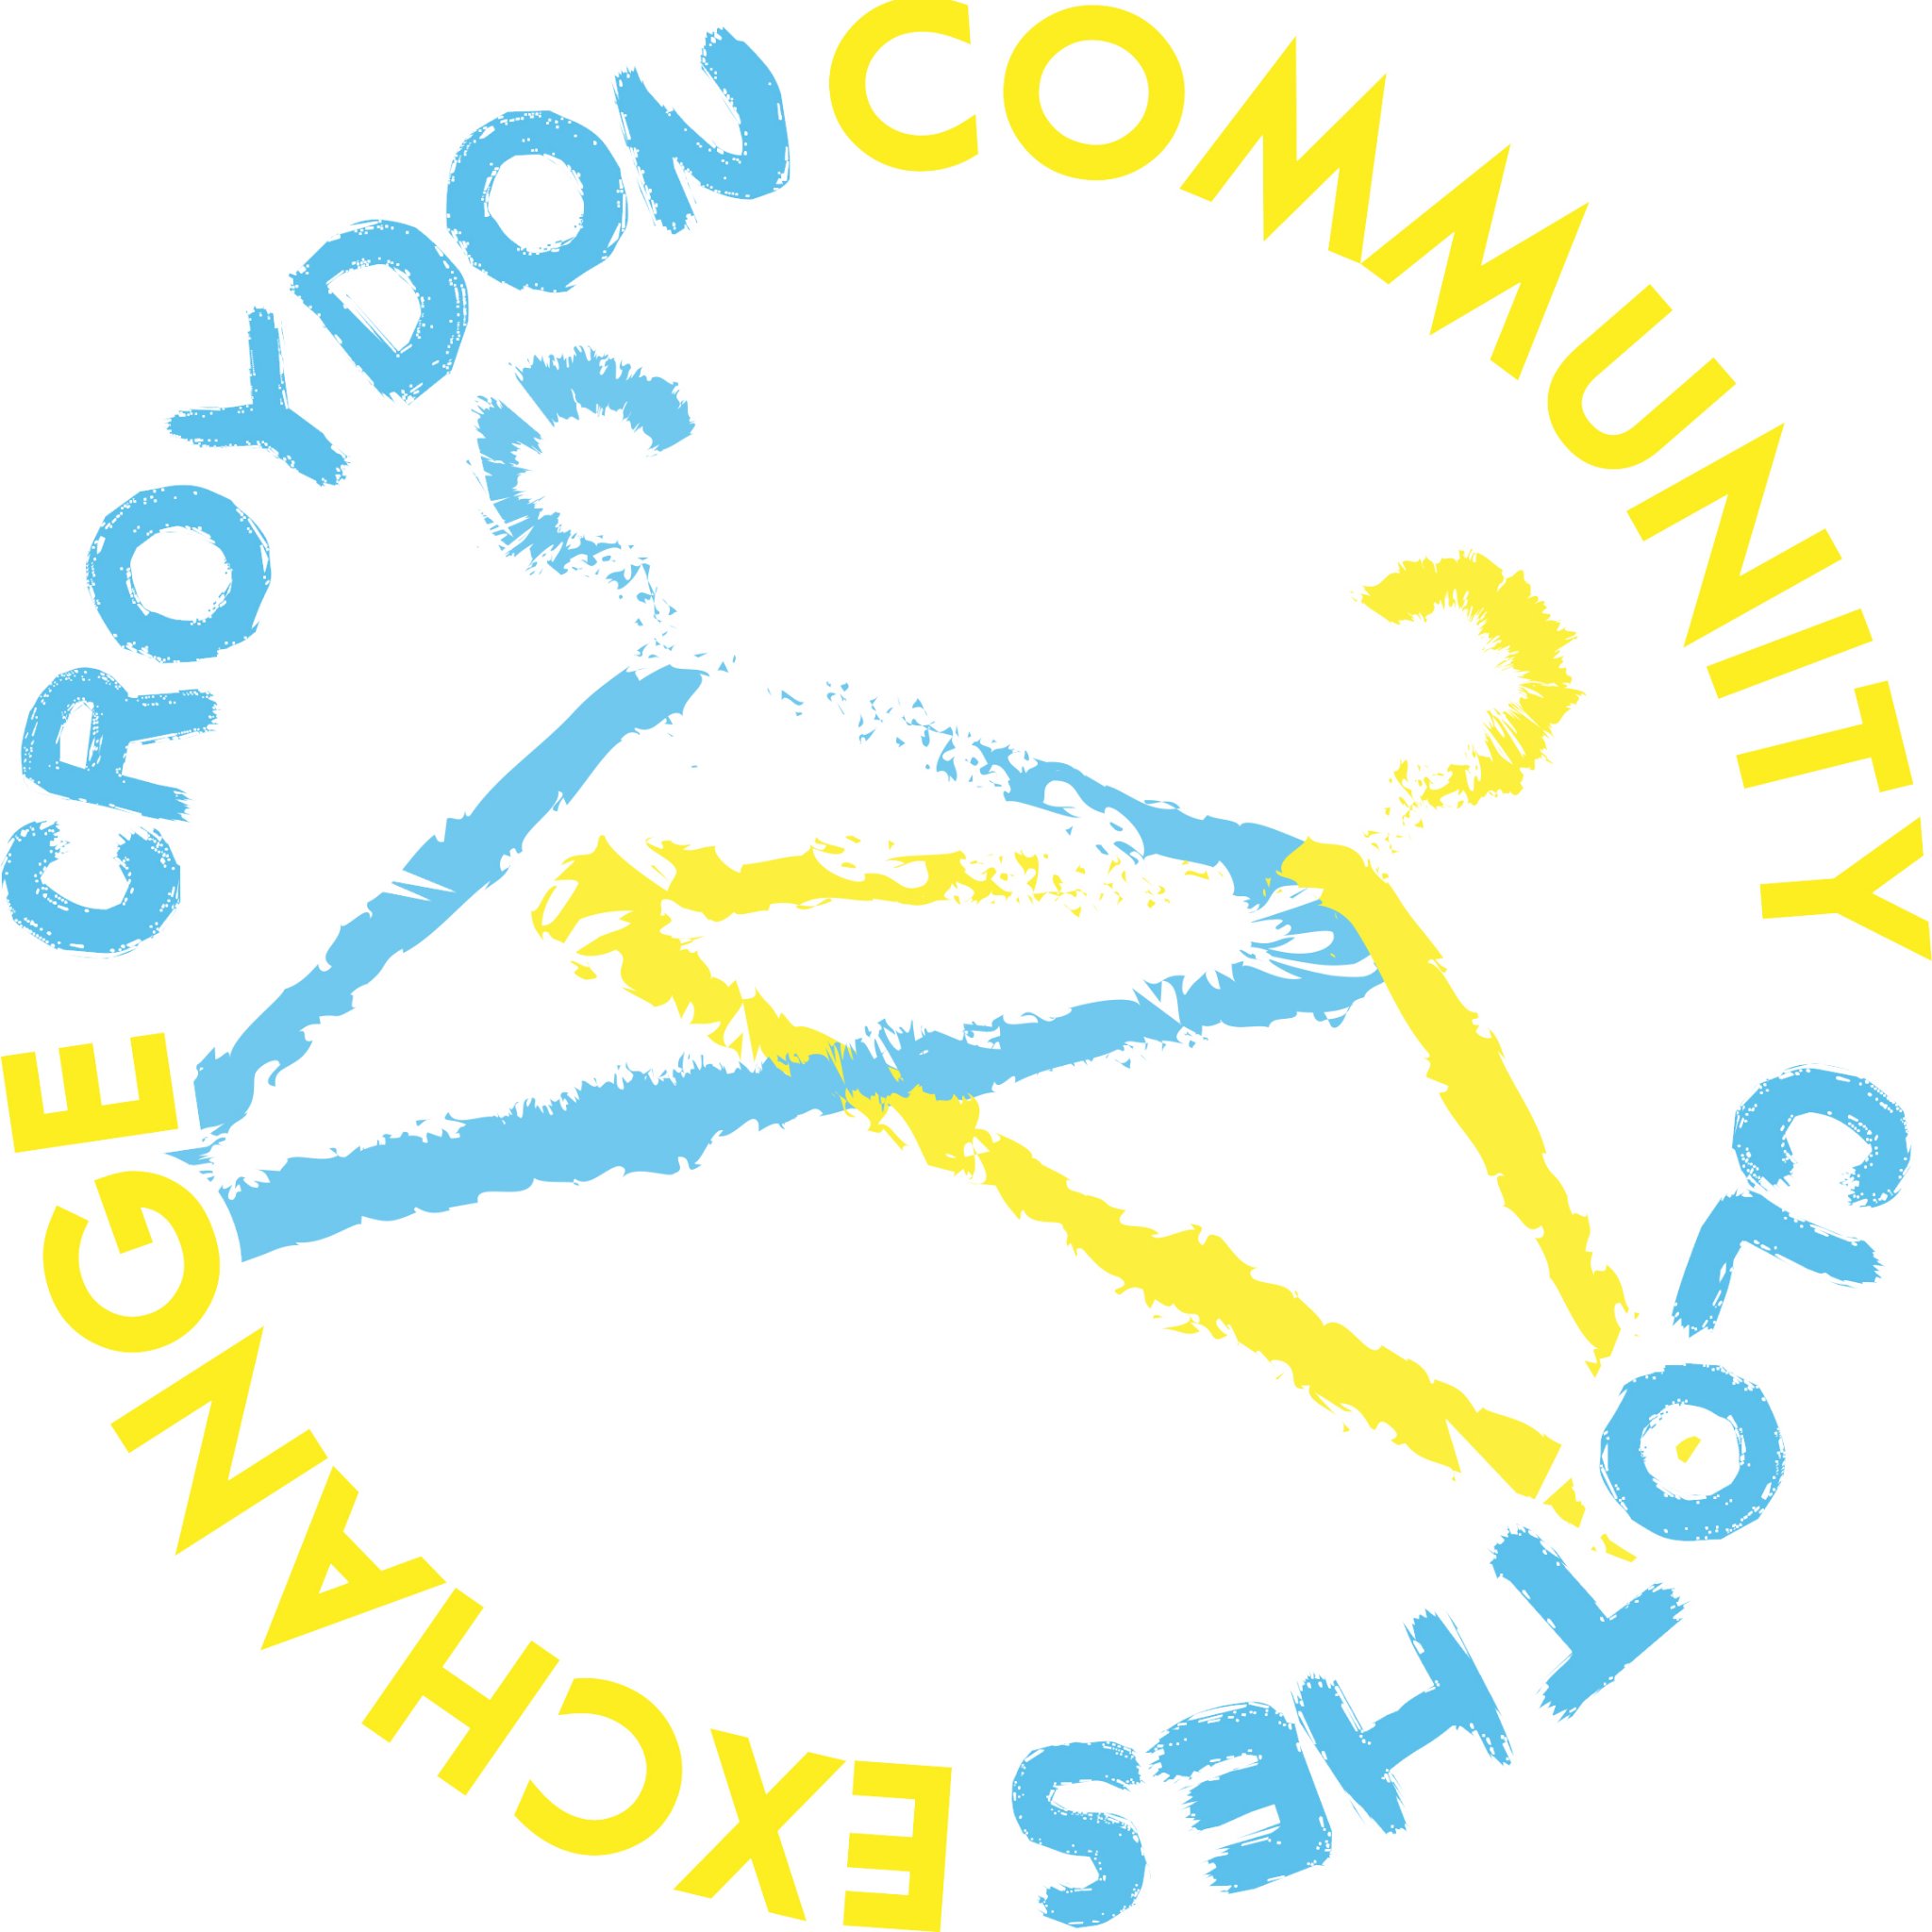 Croydon Community Clothes Exchange is a not-for-profit event where you can swap ur unloved clothing w/ other swappers'.
NEXT SWAP  👉 sometime after lockdown 👇